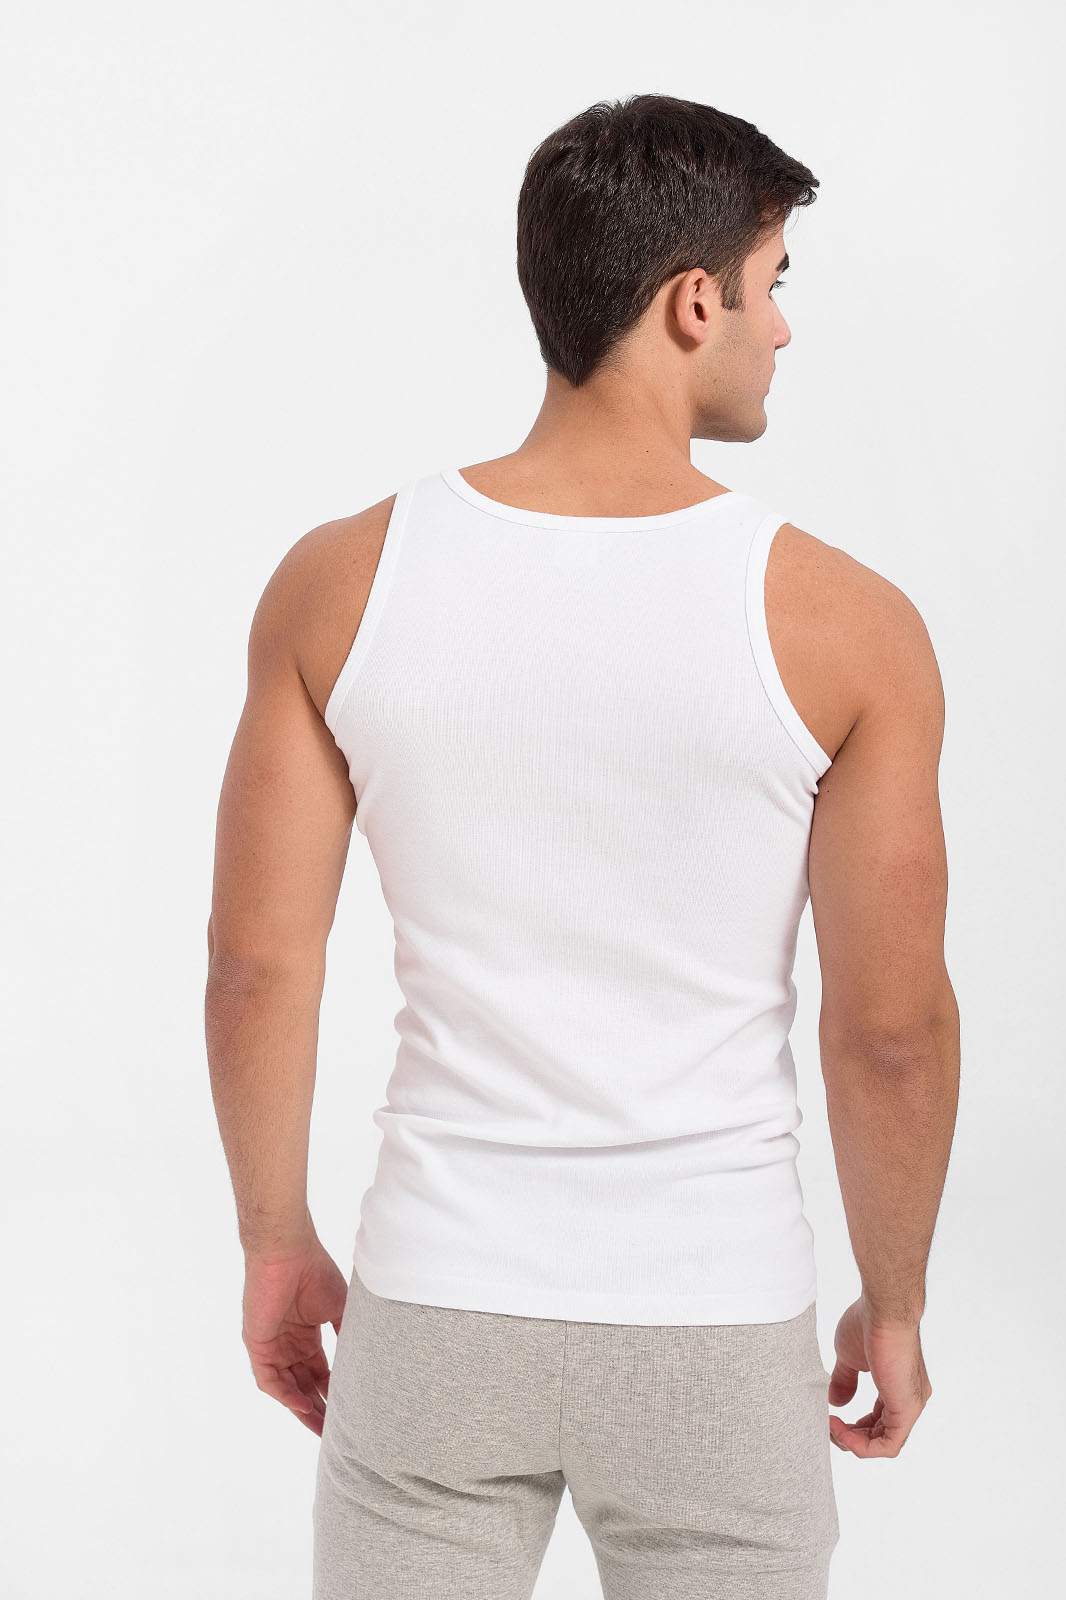 Mens LORD Undershirt  Wide Straps- 100% Cotton